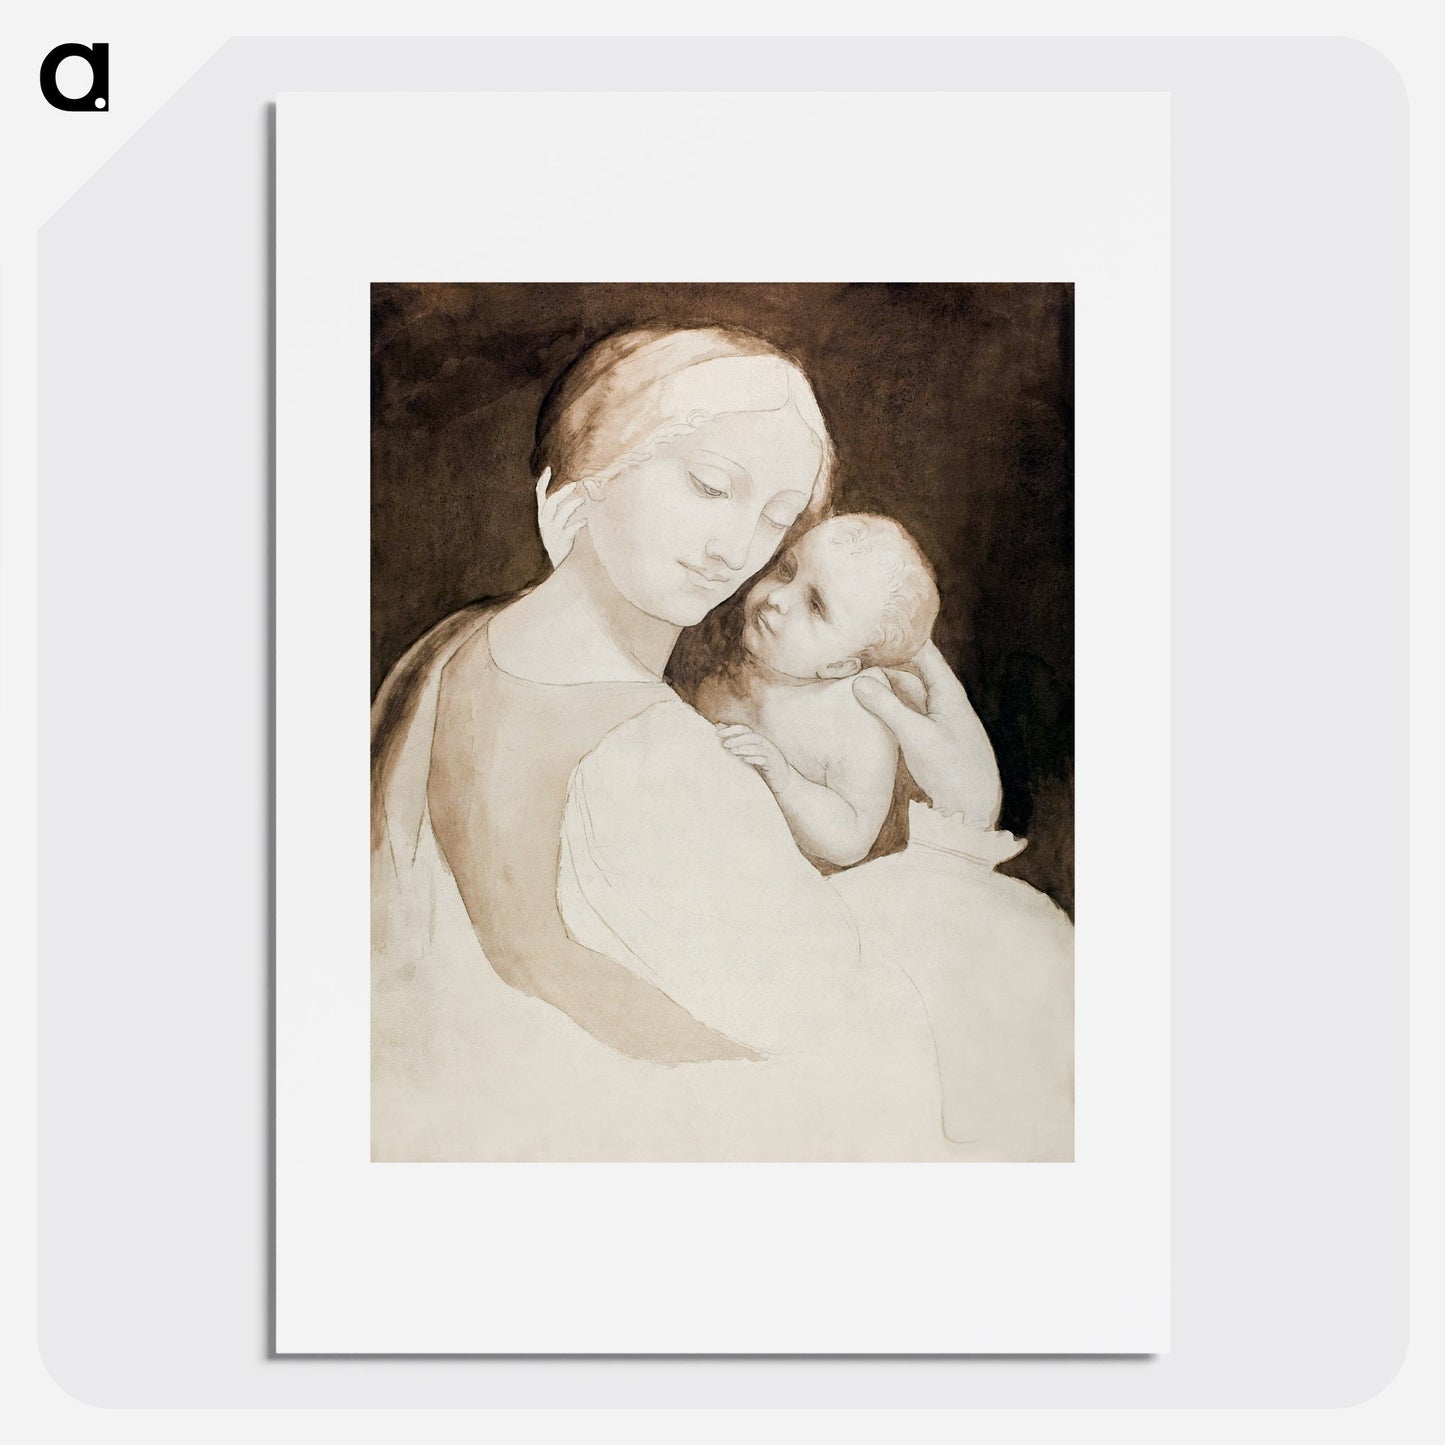 Madonna and Child, and Fragment of Woman’s Torso Poster.